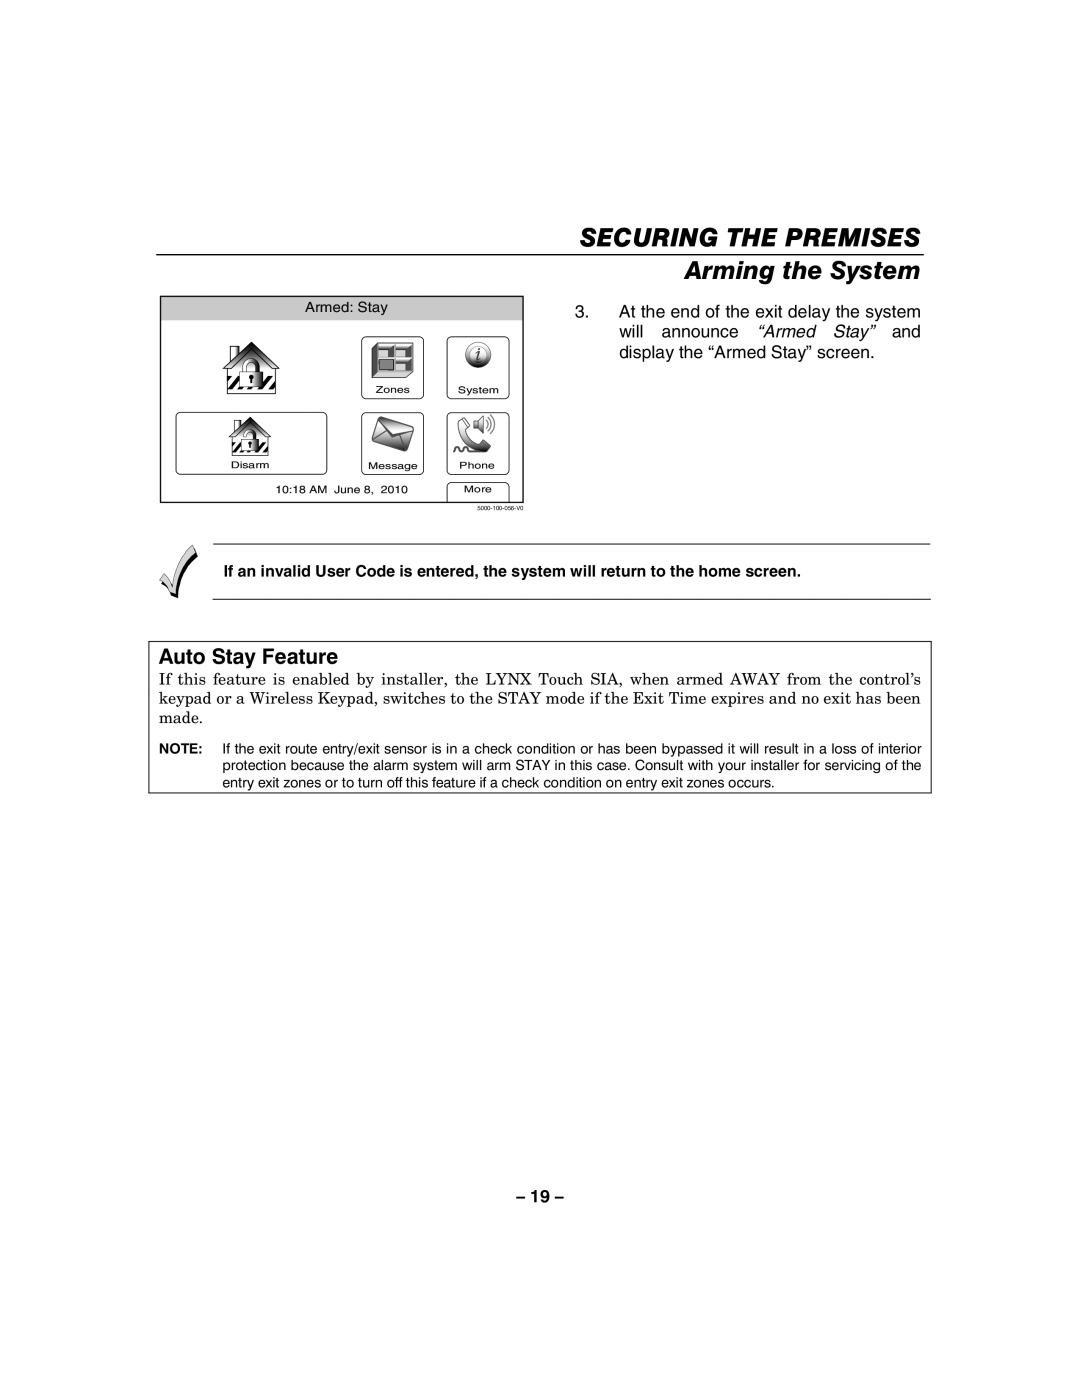 Honeywell 800-06894 manual Securing The Premises, Arming the System, Auto Stay Feature 